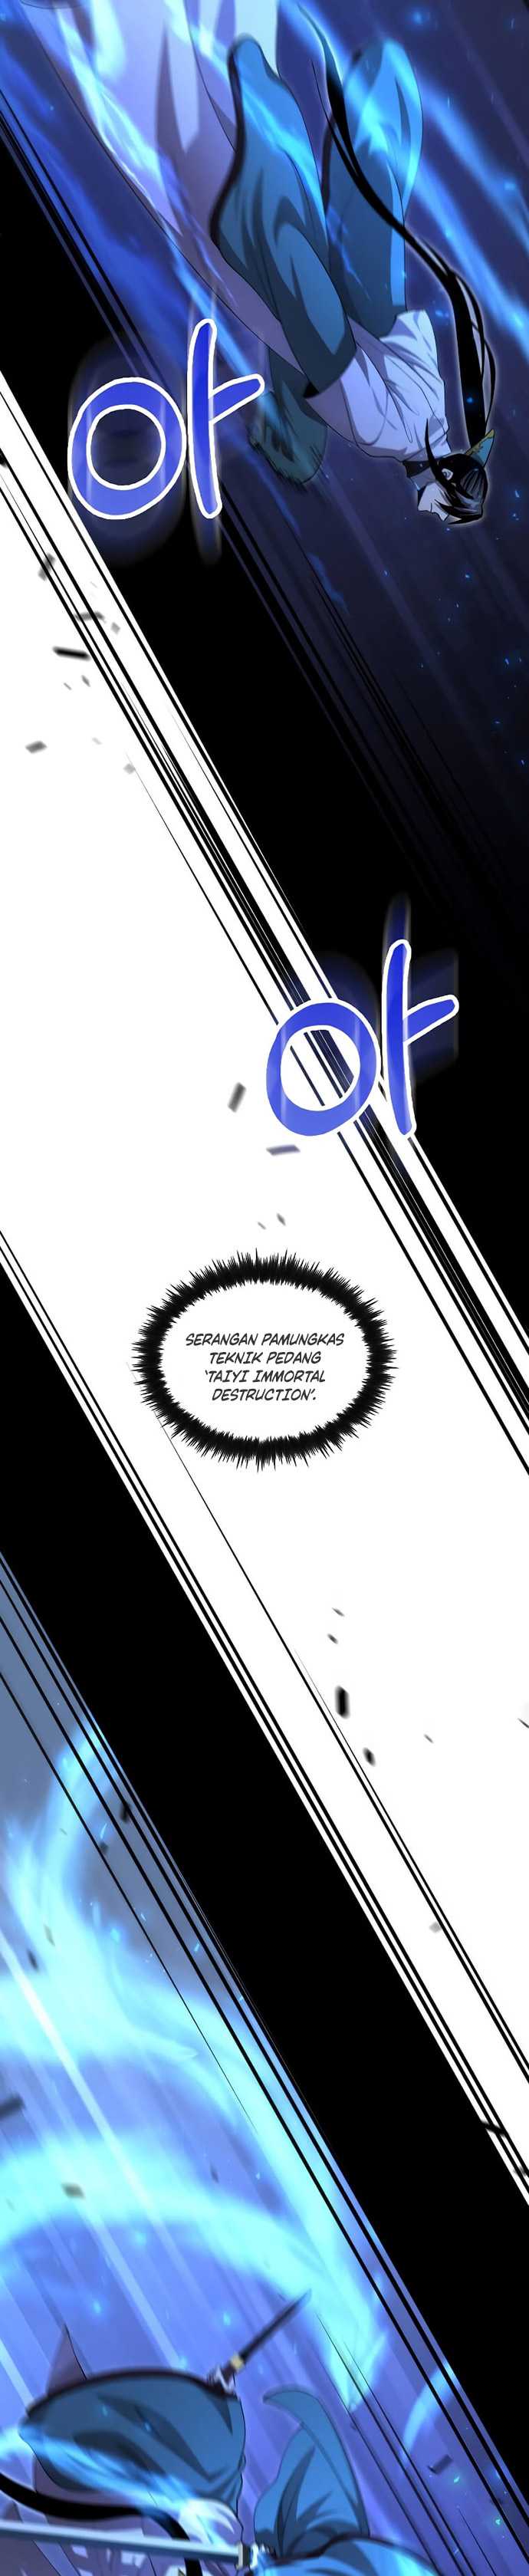 Doctor’s Rebirth Chapter 137